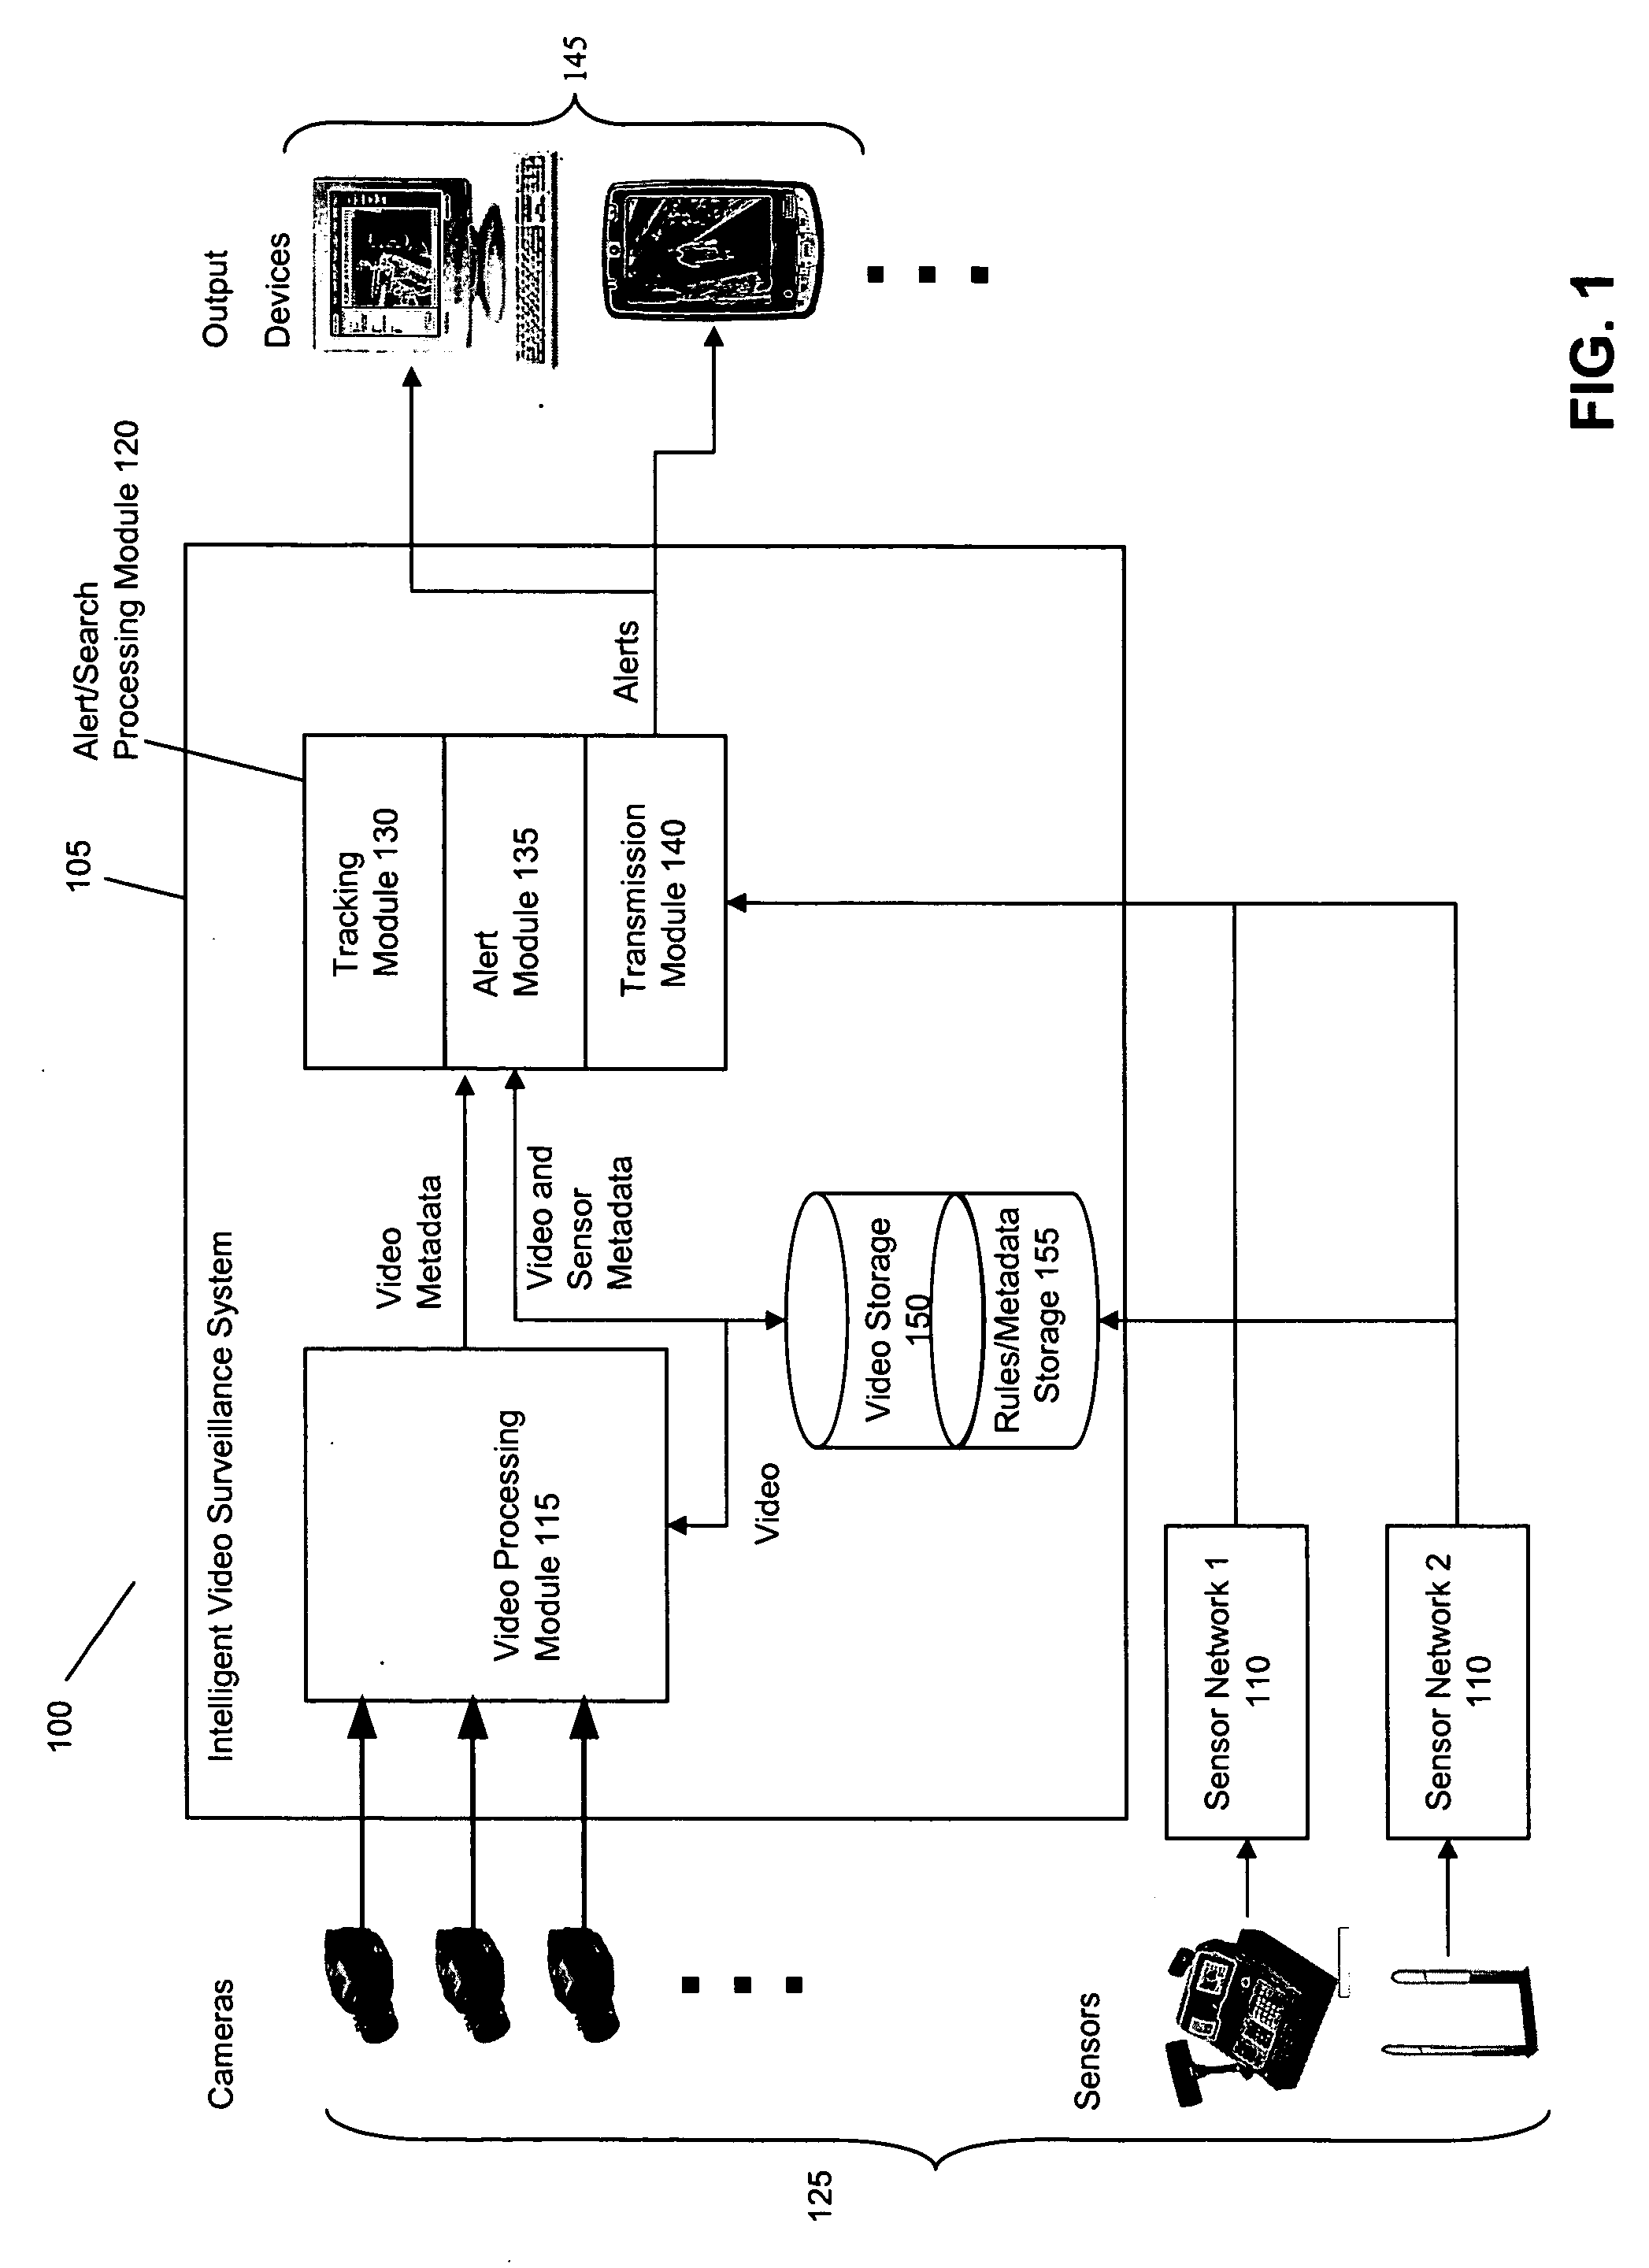 Systems and methods for providing video surveillance data